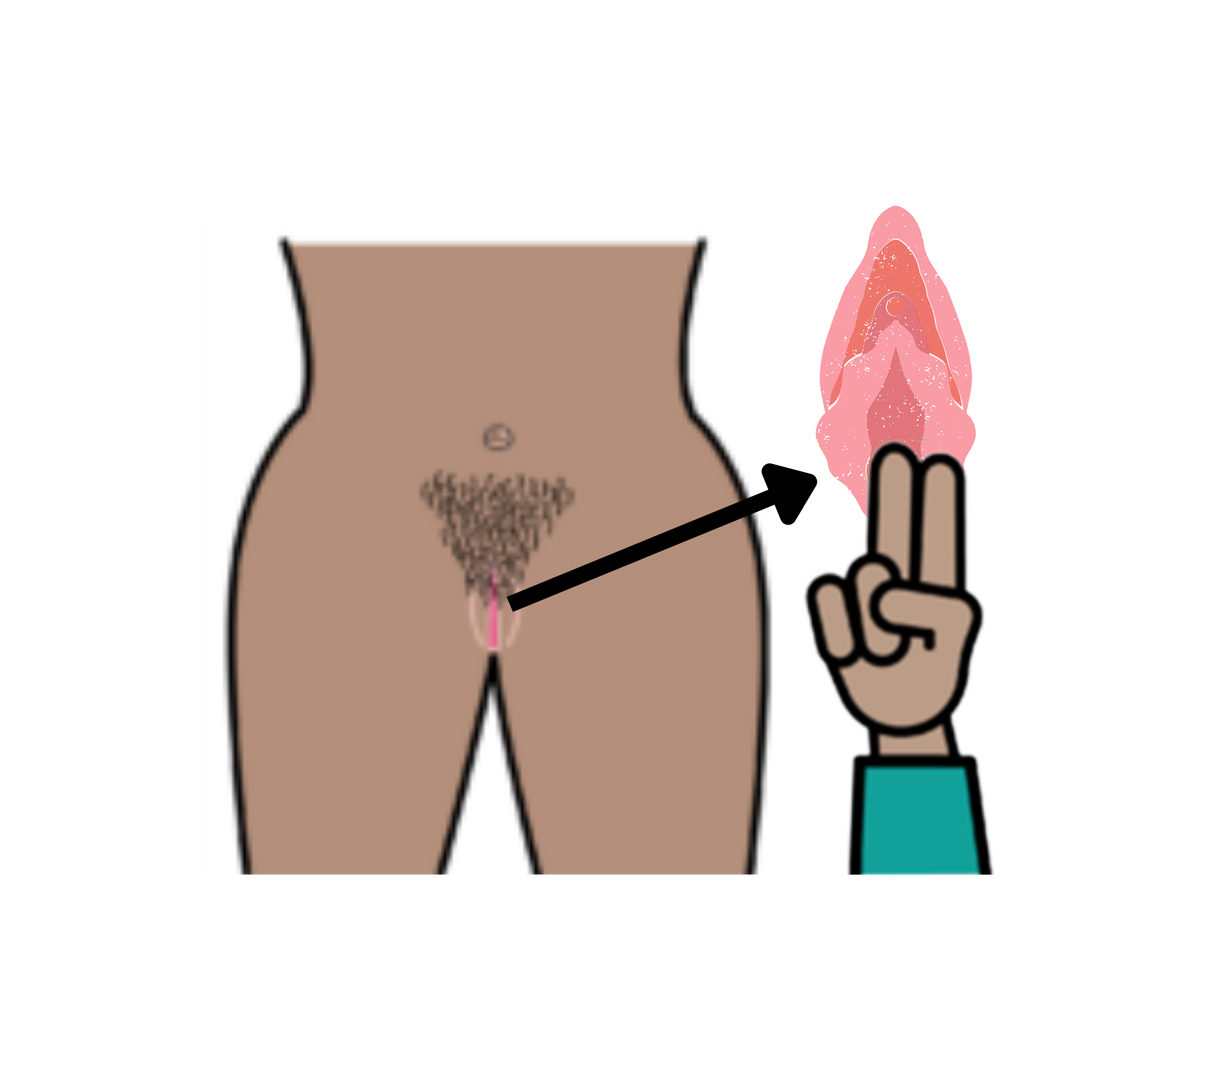 Image of a hand with two fingers raised, a vulva and the midsection of a person. The two fingers are near the entrance to the vagina. An arrow points from the person’s midsection to the hand and vulva.